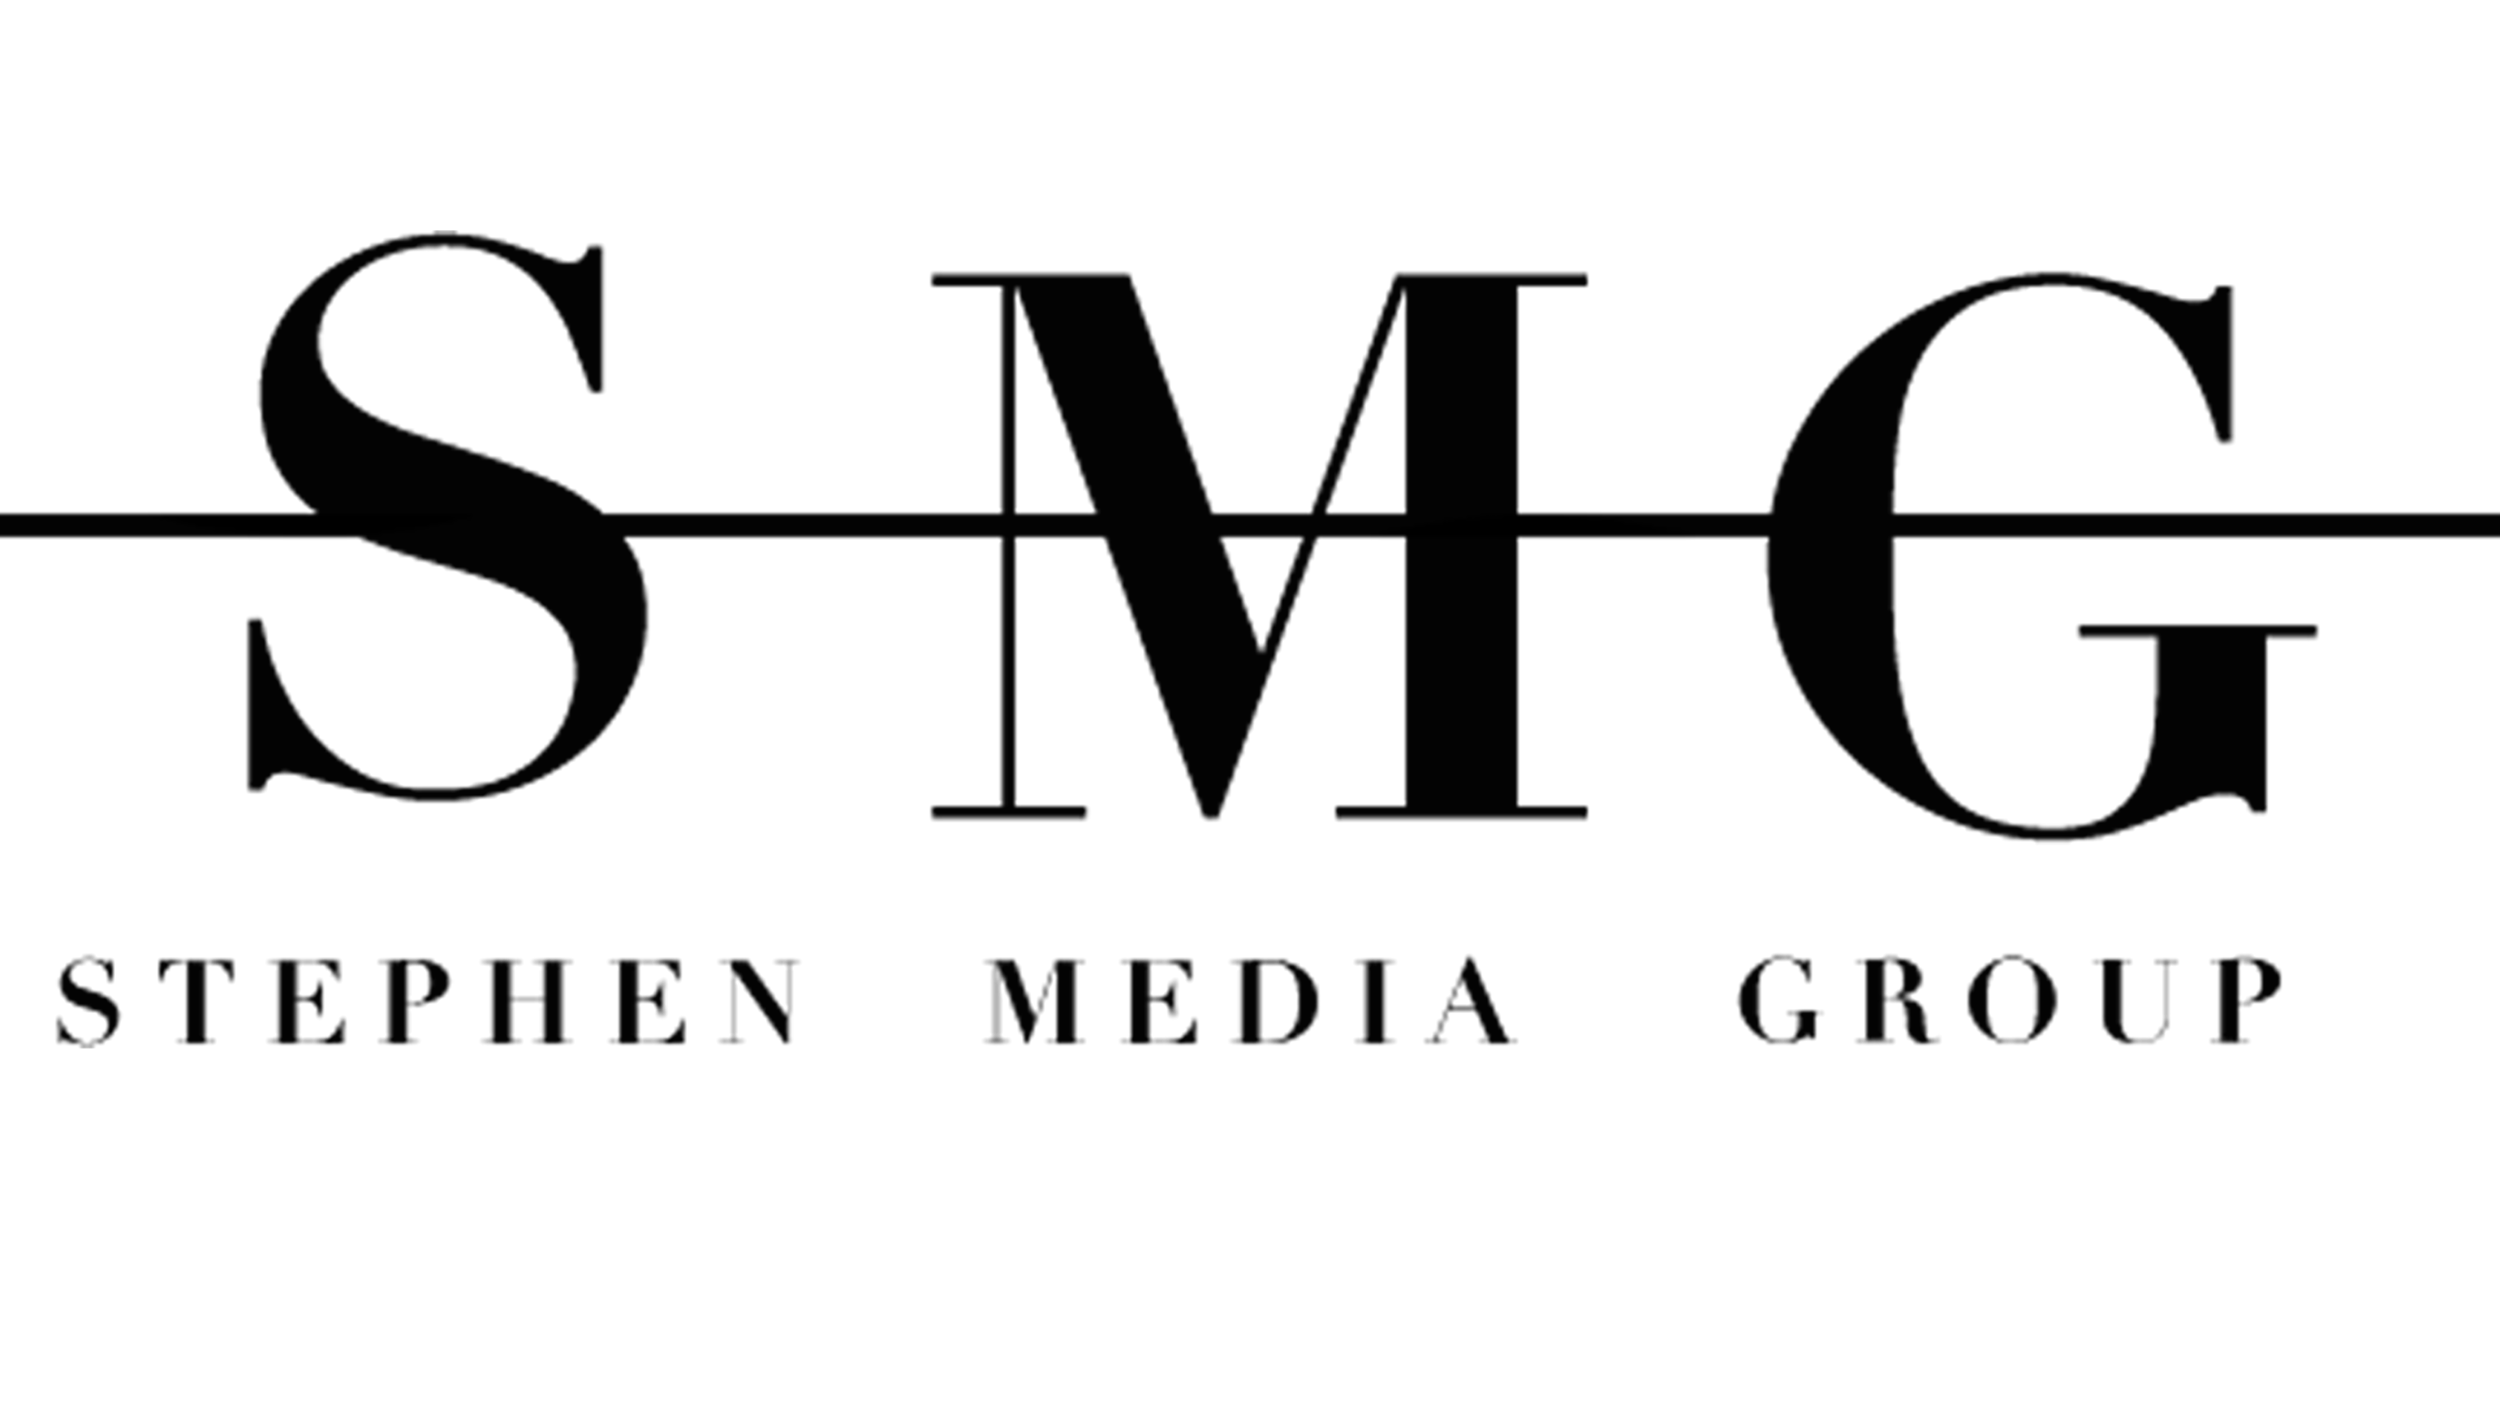 SMG LOGO 2 LINE 11x14.png